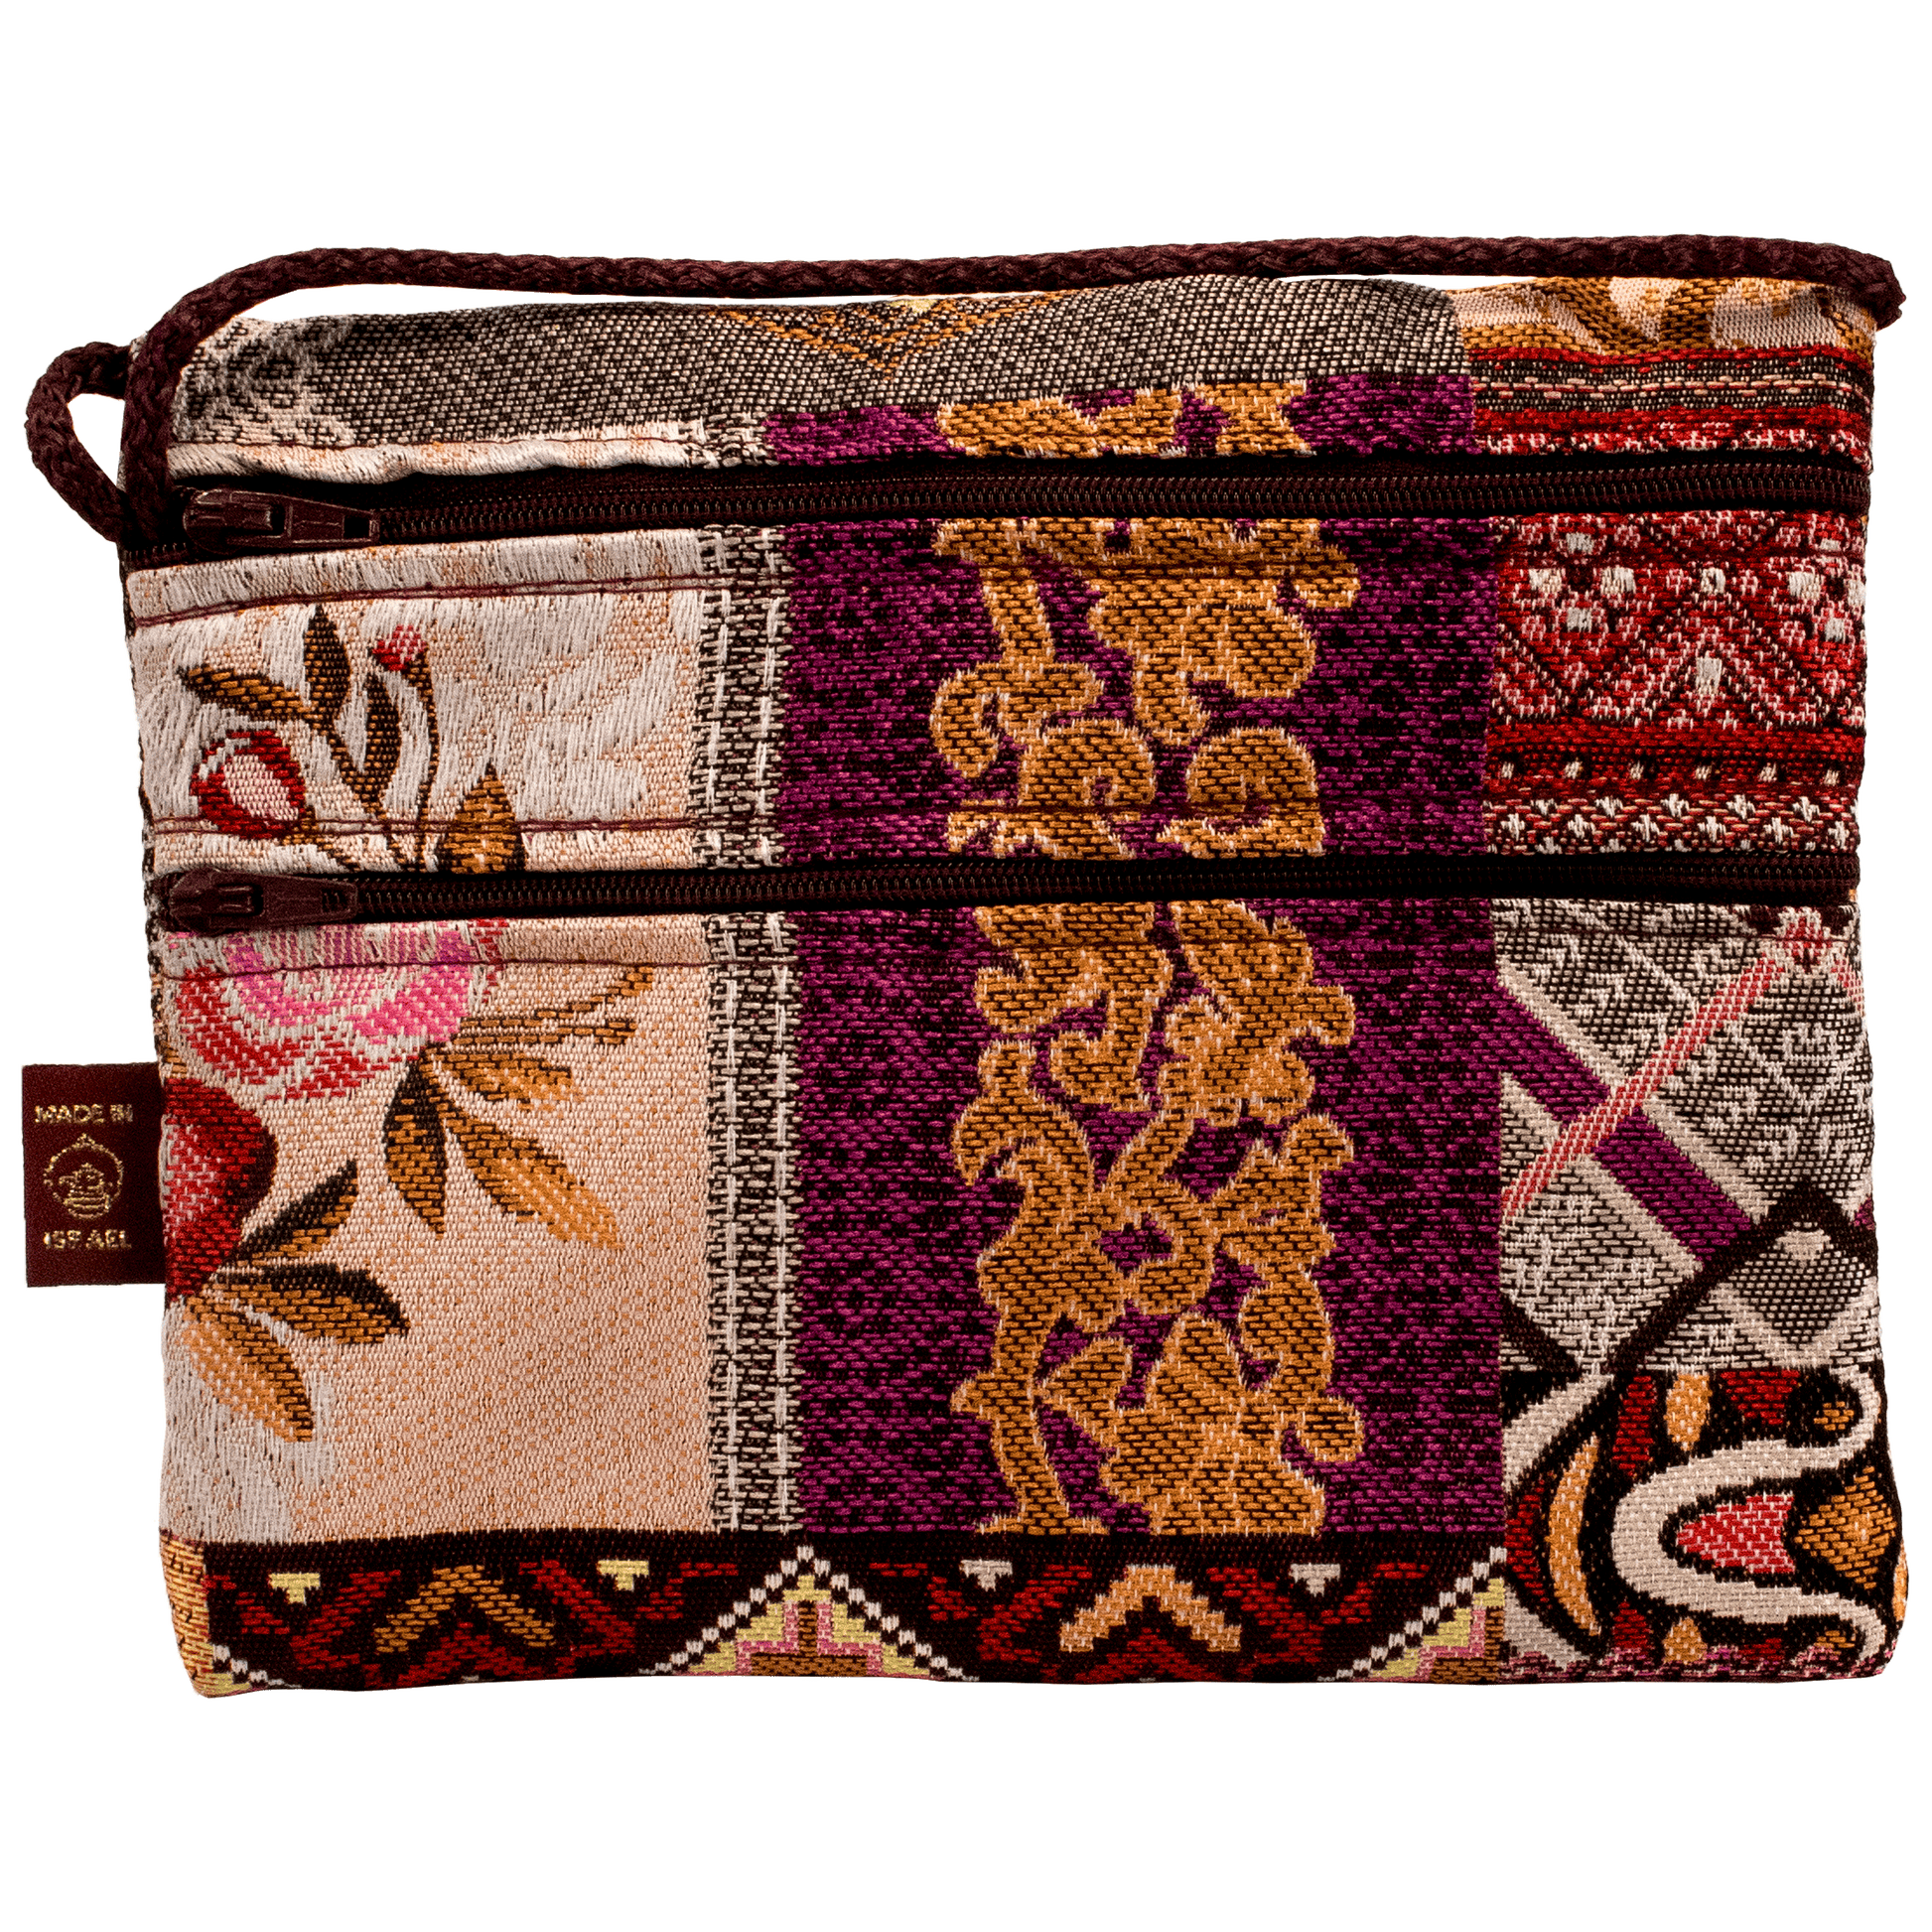 Double zipper horizontal crossbody bag with floral patchwork design